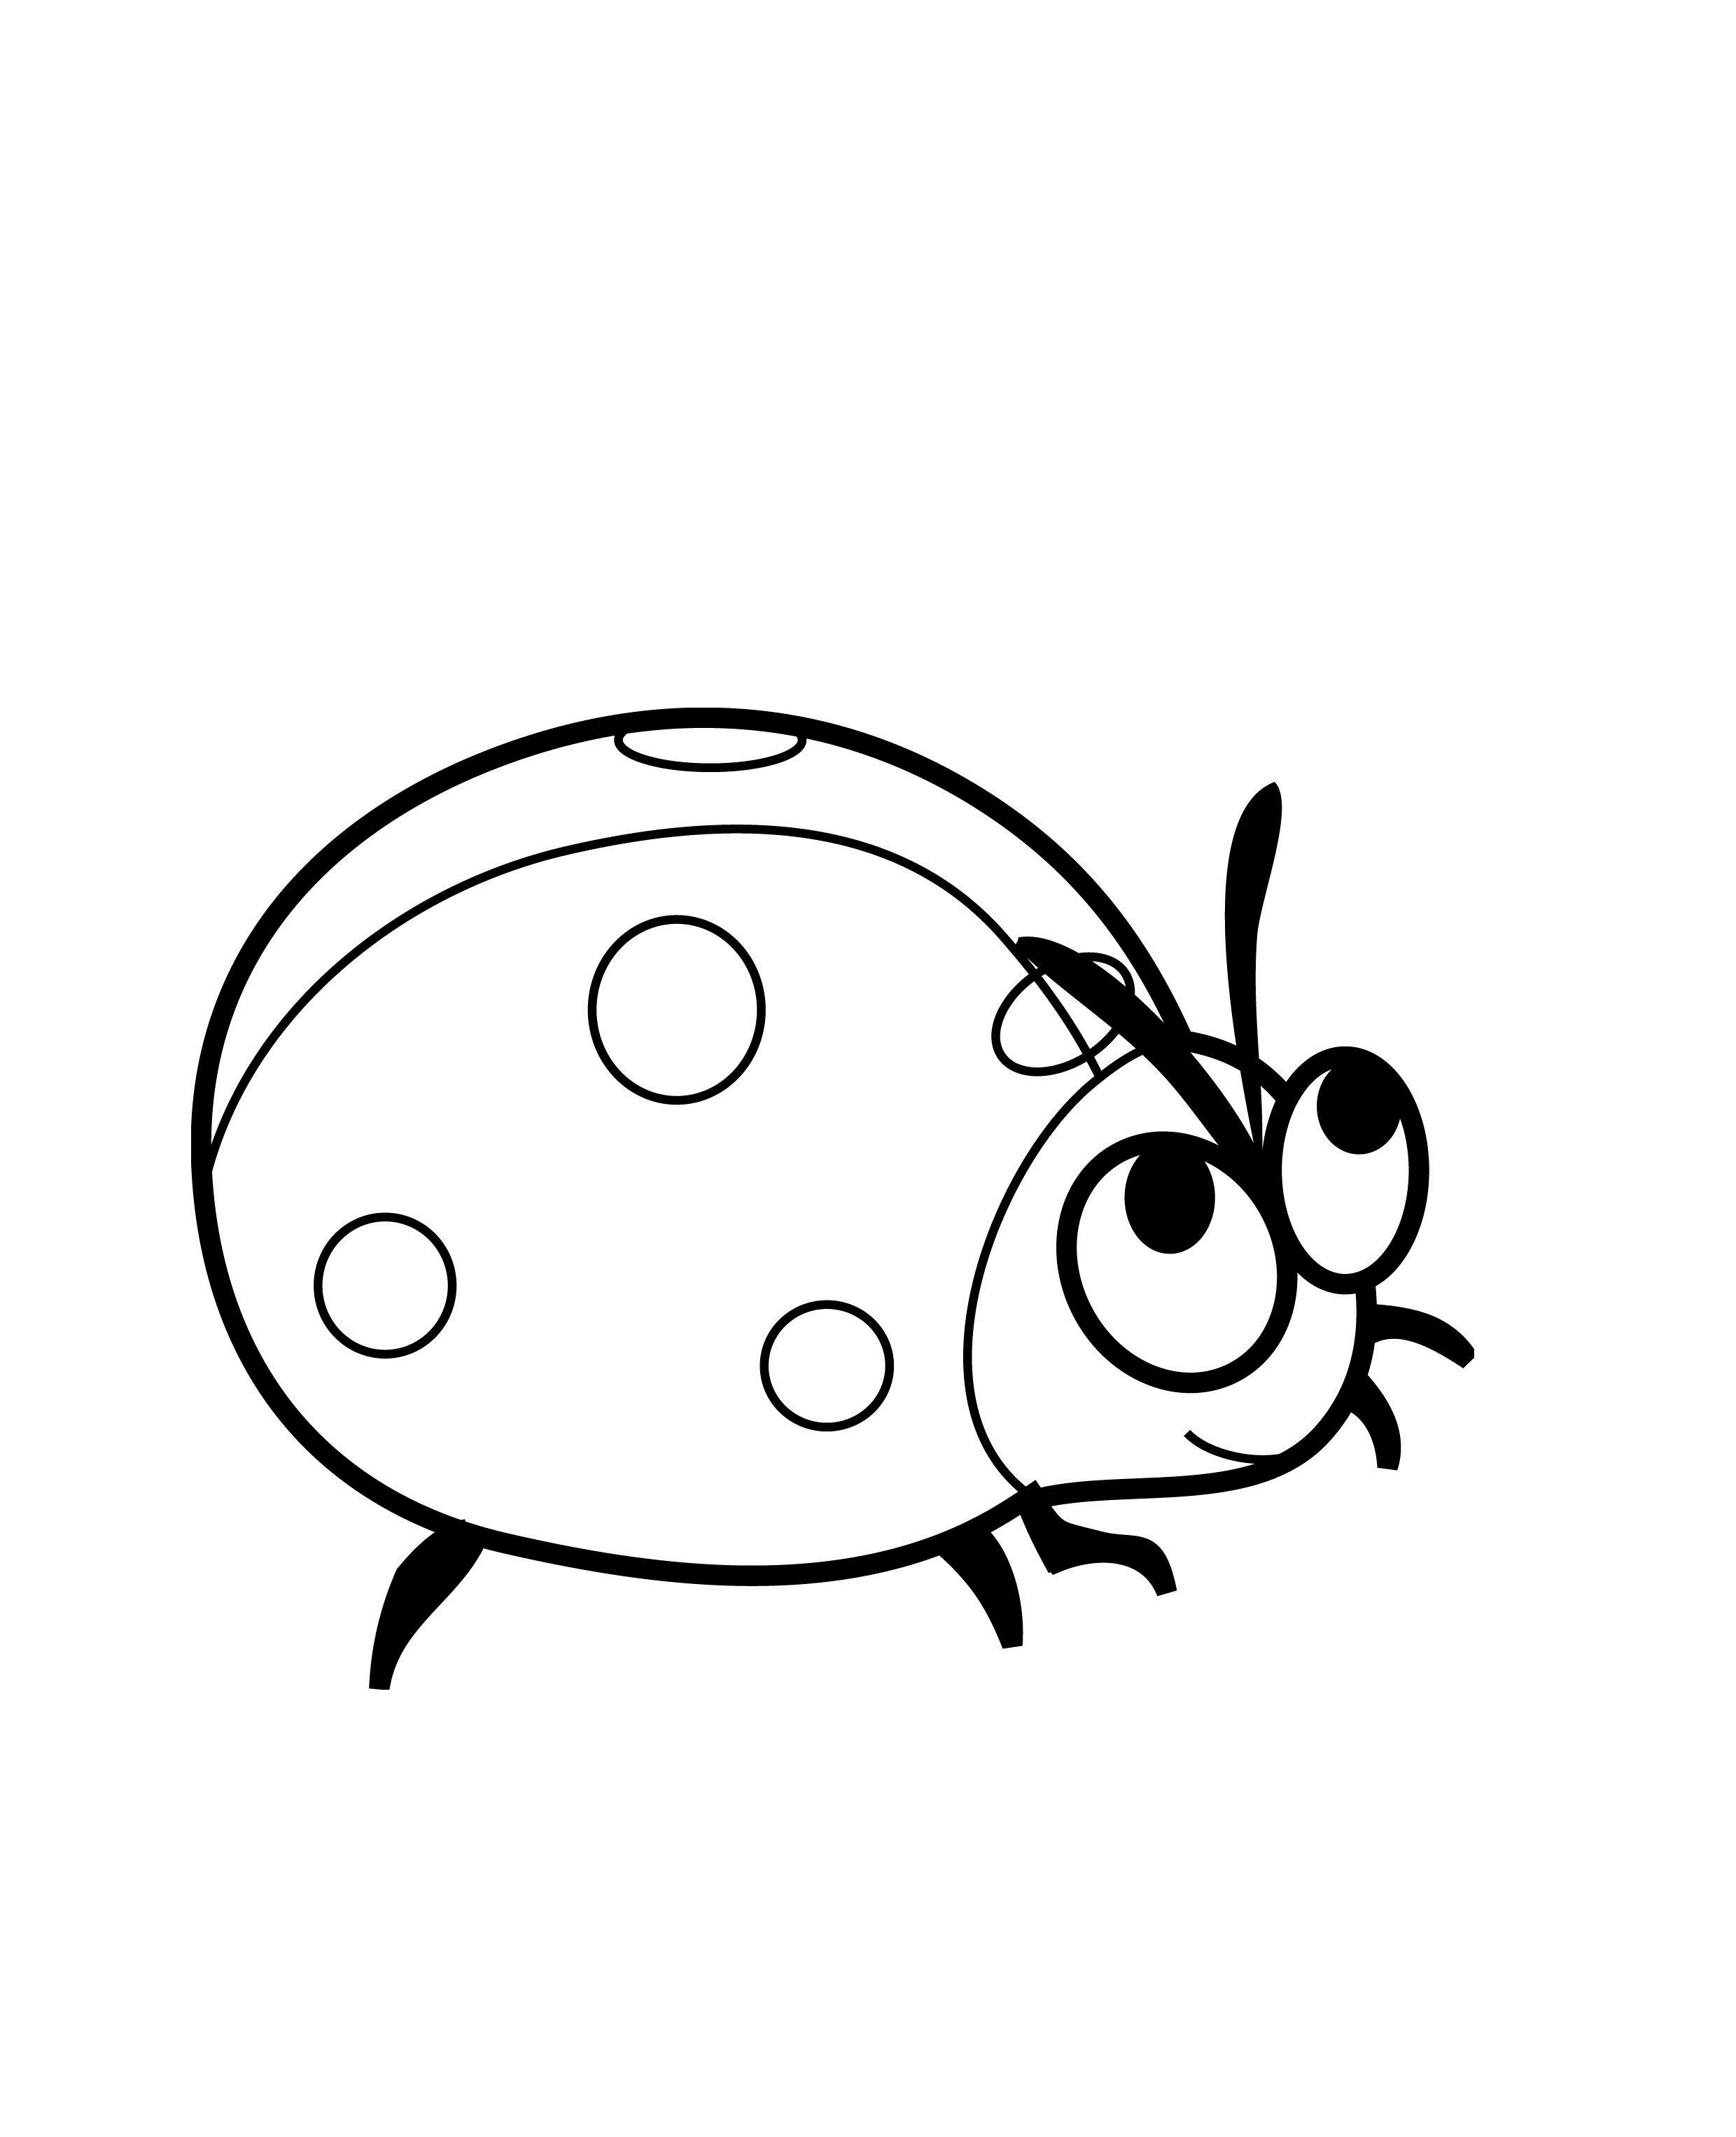 Ladybug Print Out Coloring Pages